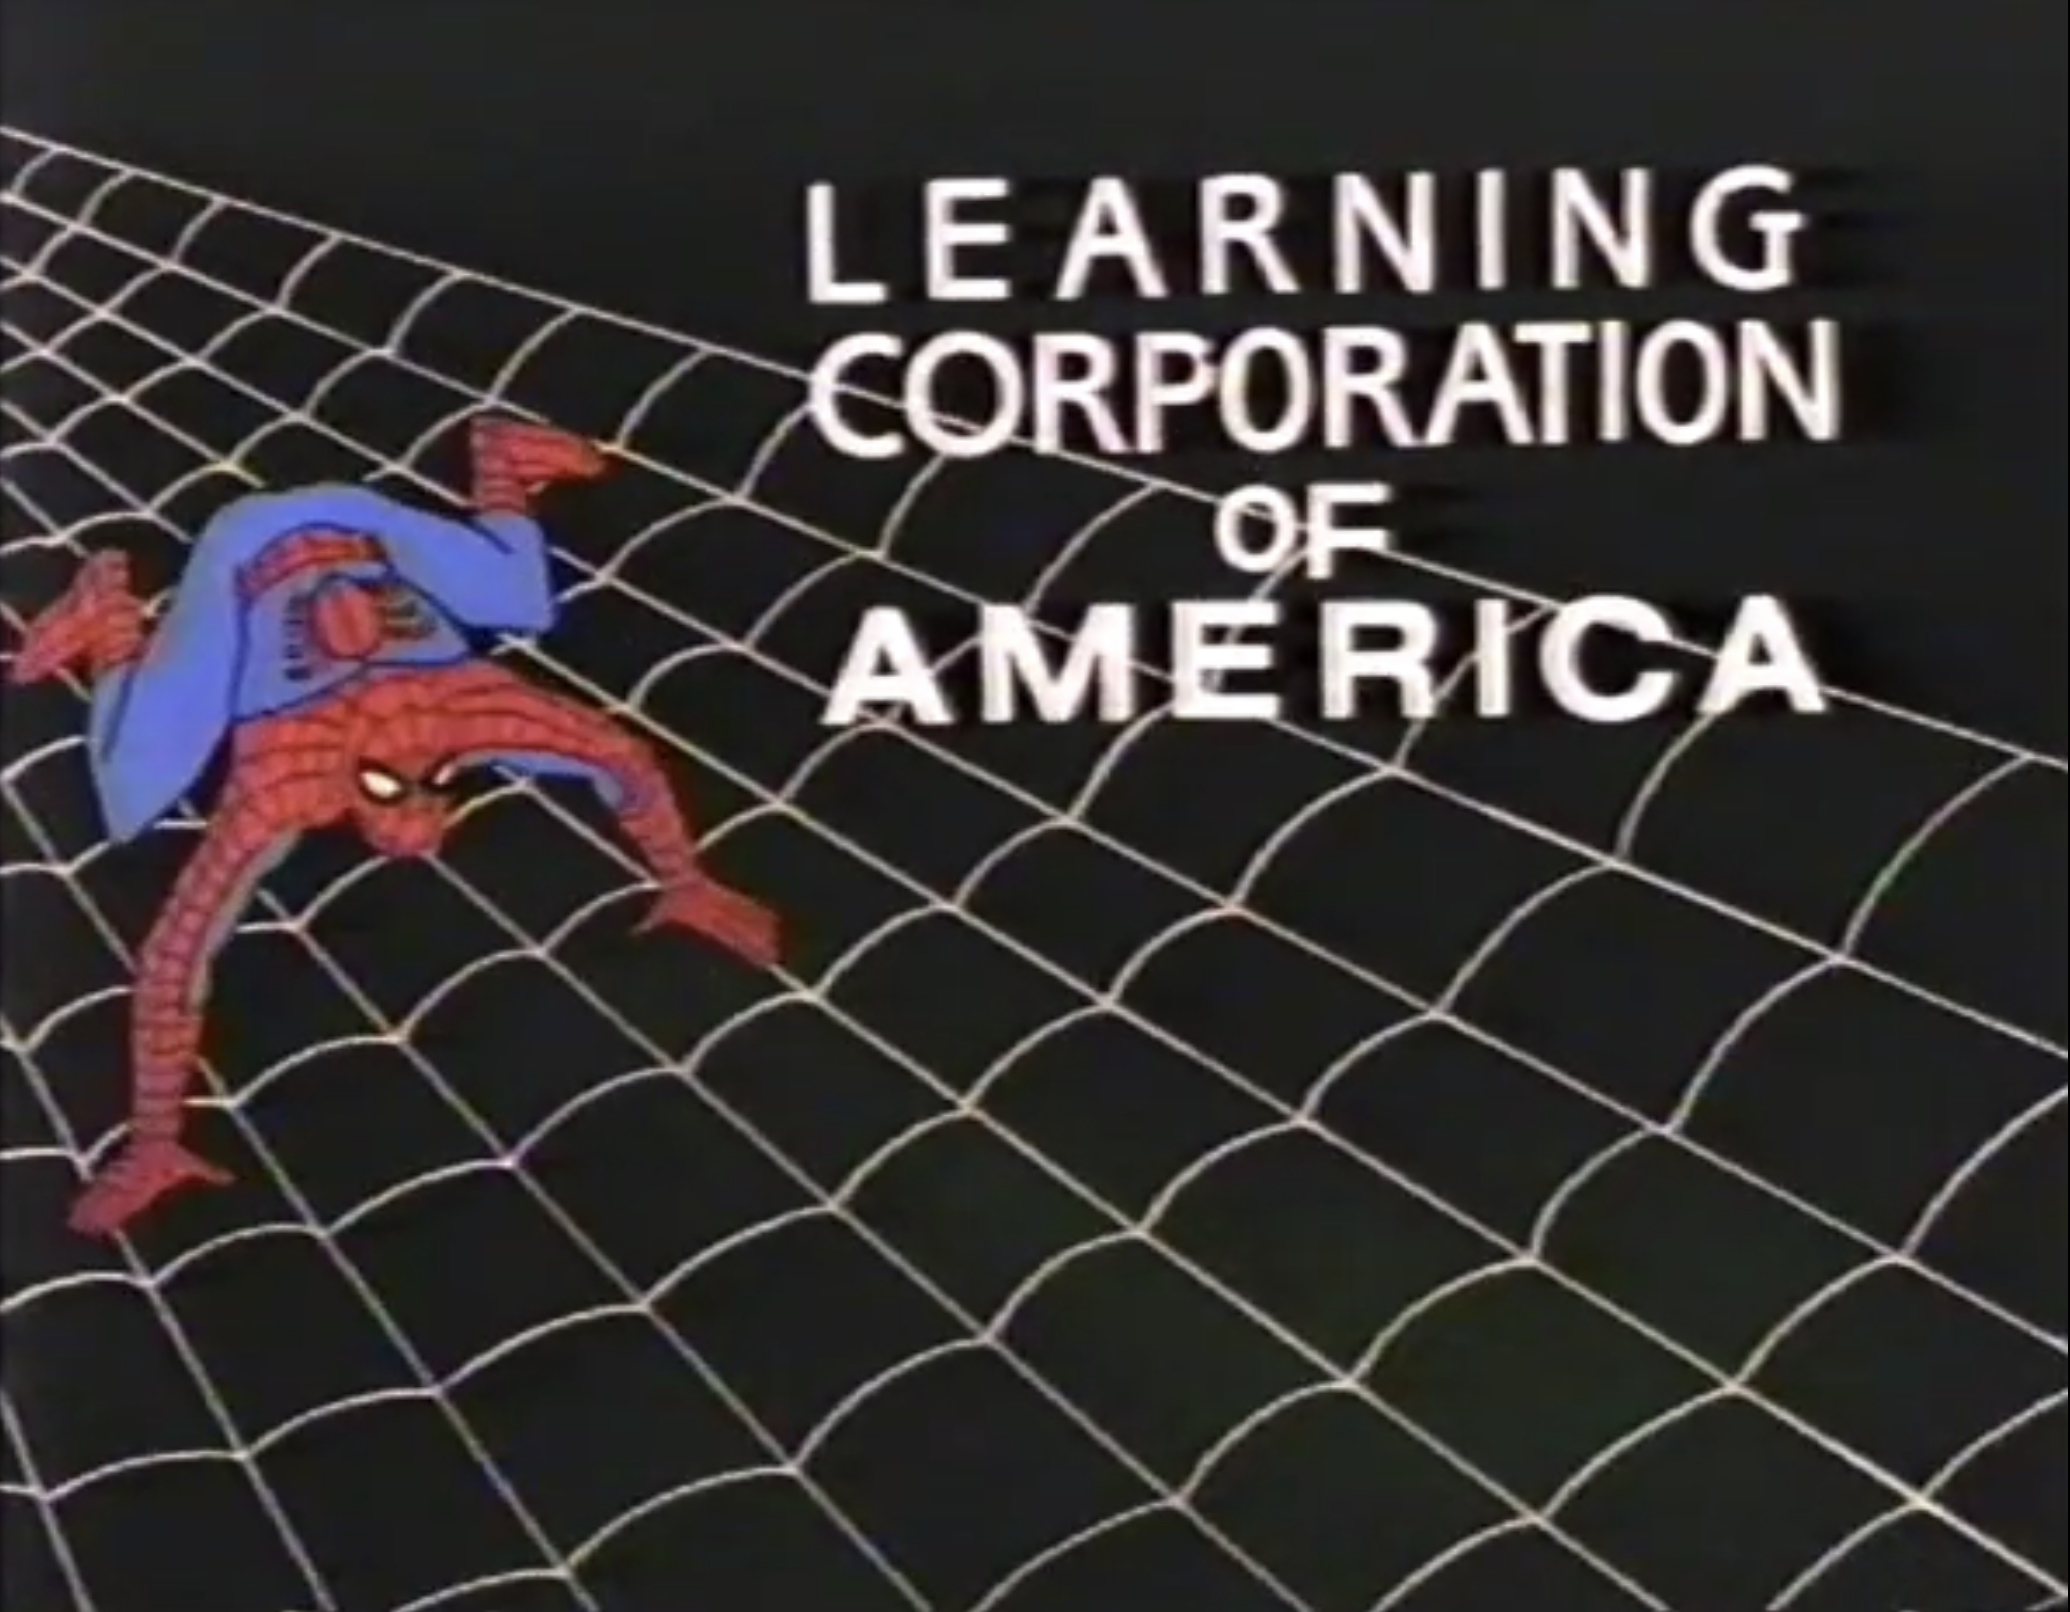 Spider-Man Safety Series: What to do about Drugs - Spider-Man Safety Series (partially found direct-to-video animated educational series; 1990)